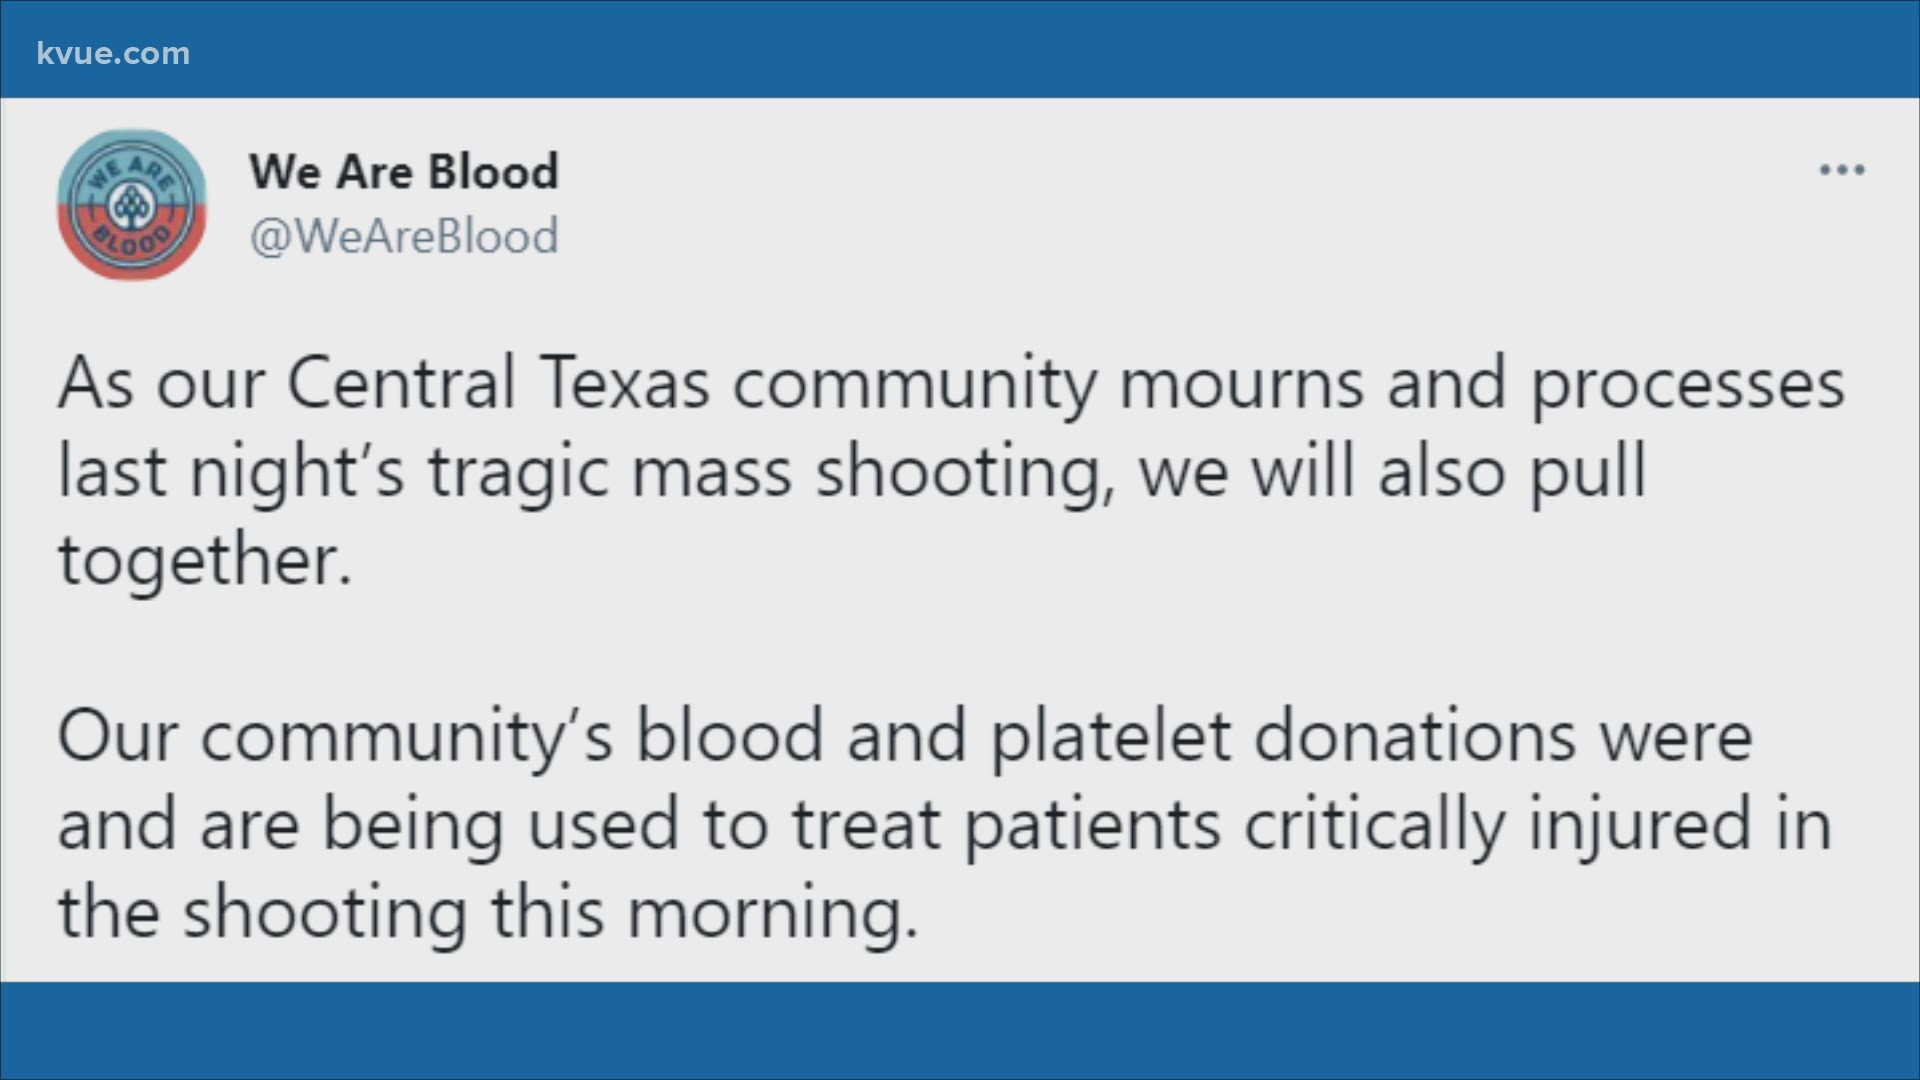 The center is encouraging those who wish to help out to do so by donating blood.